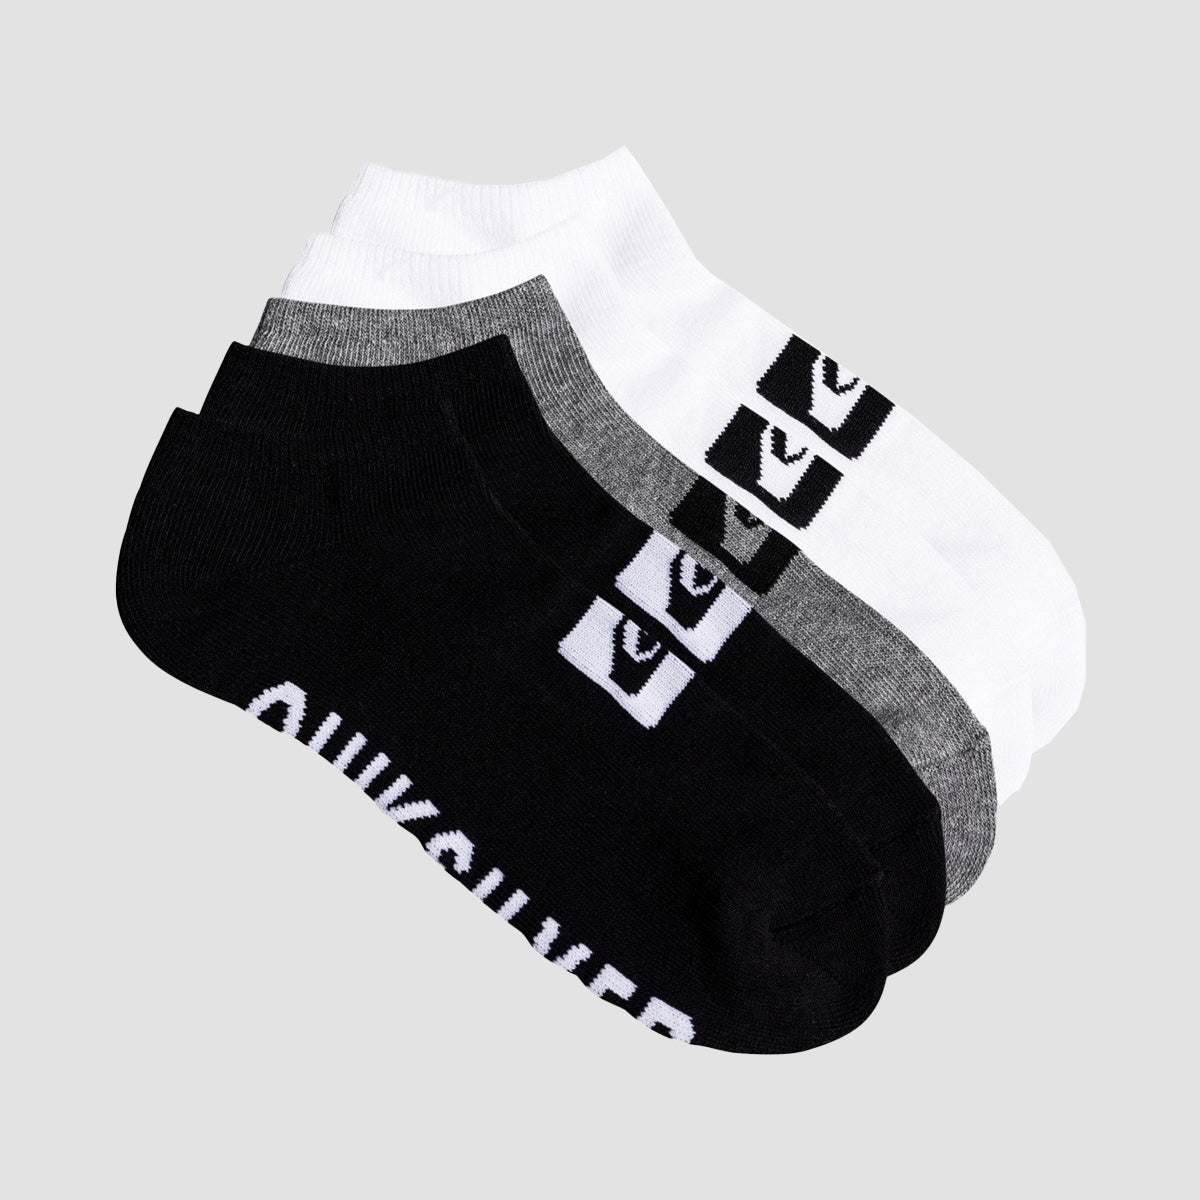 Quiksilver Ankle Socks 5 Pack Assorted